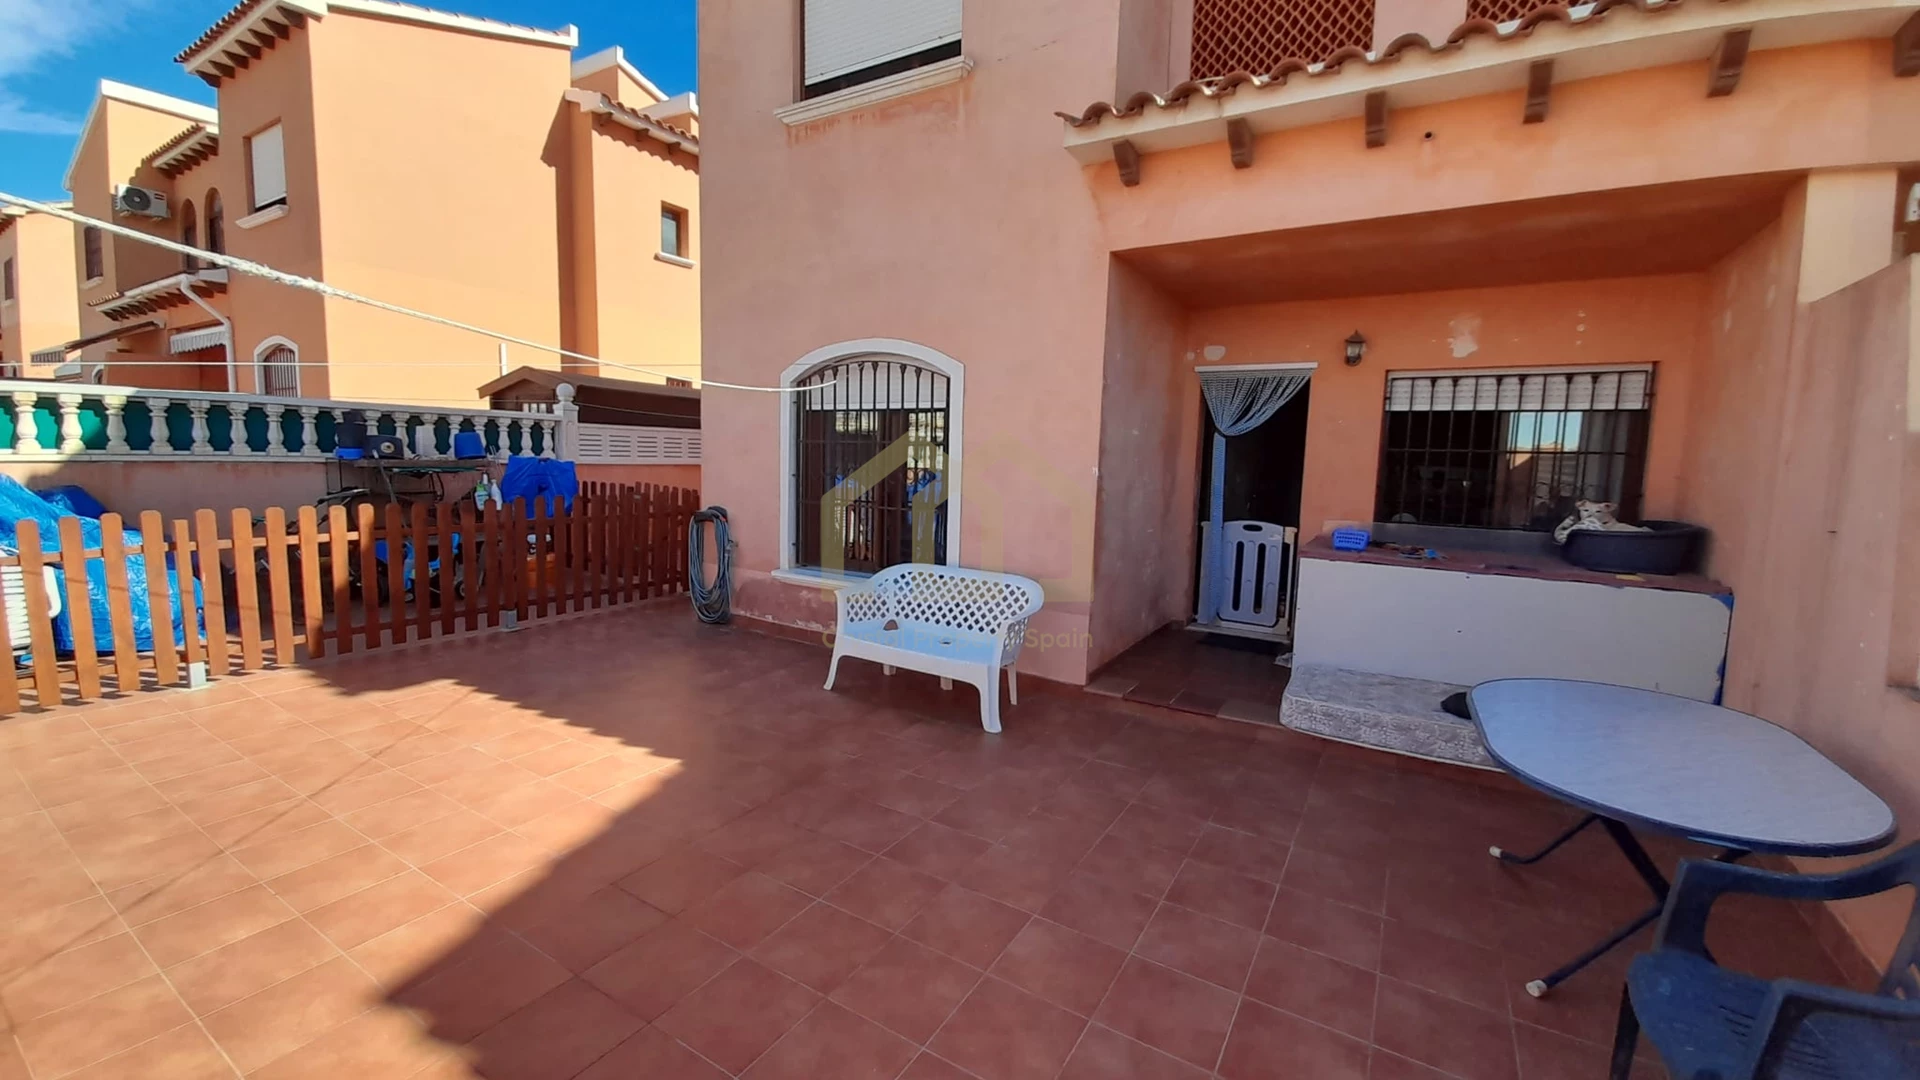 Torrevieja, Aguas Nuevas, Apartment, CPL1/162, Fantastic ground floor bungalow in the famous Aguas Nuevas area in Torrevieja with community pool and big tiled garden.